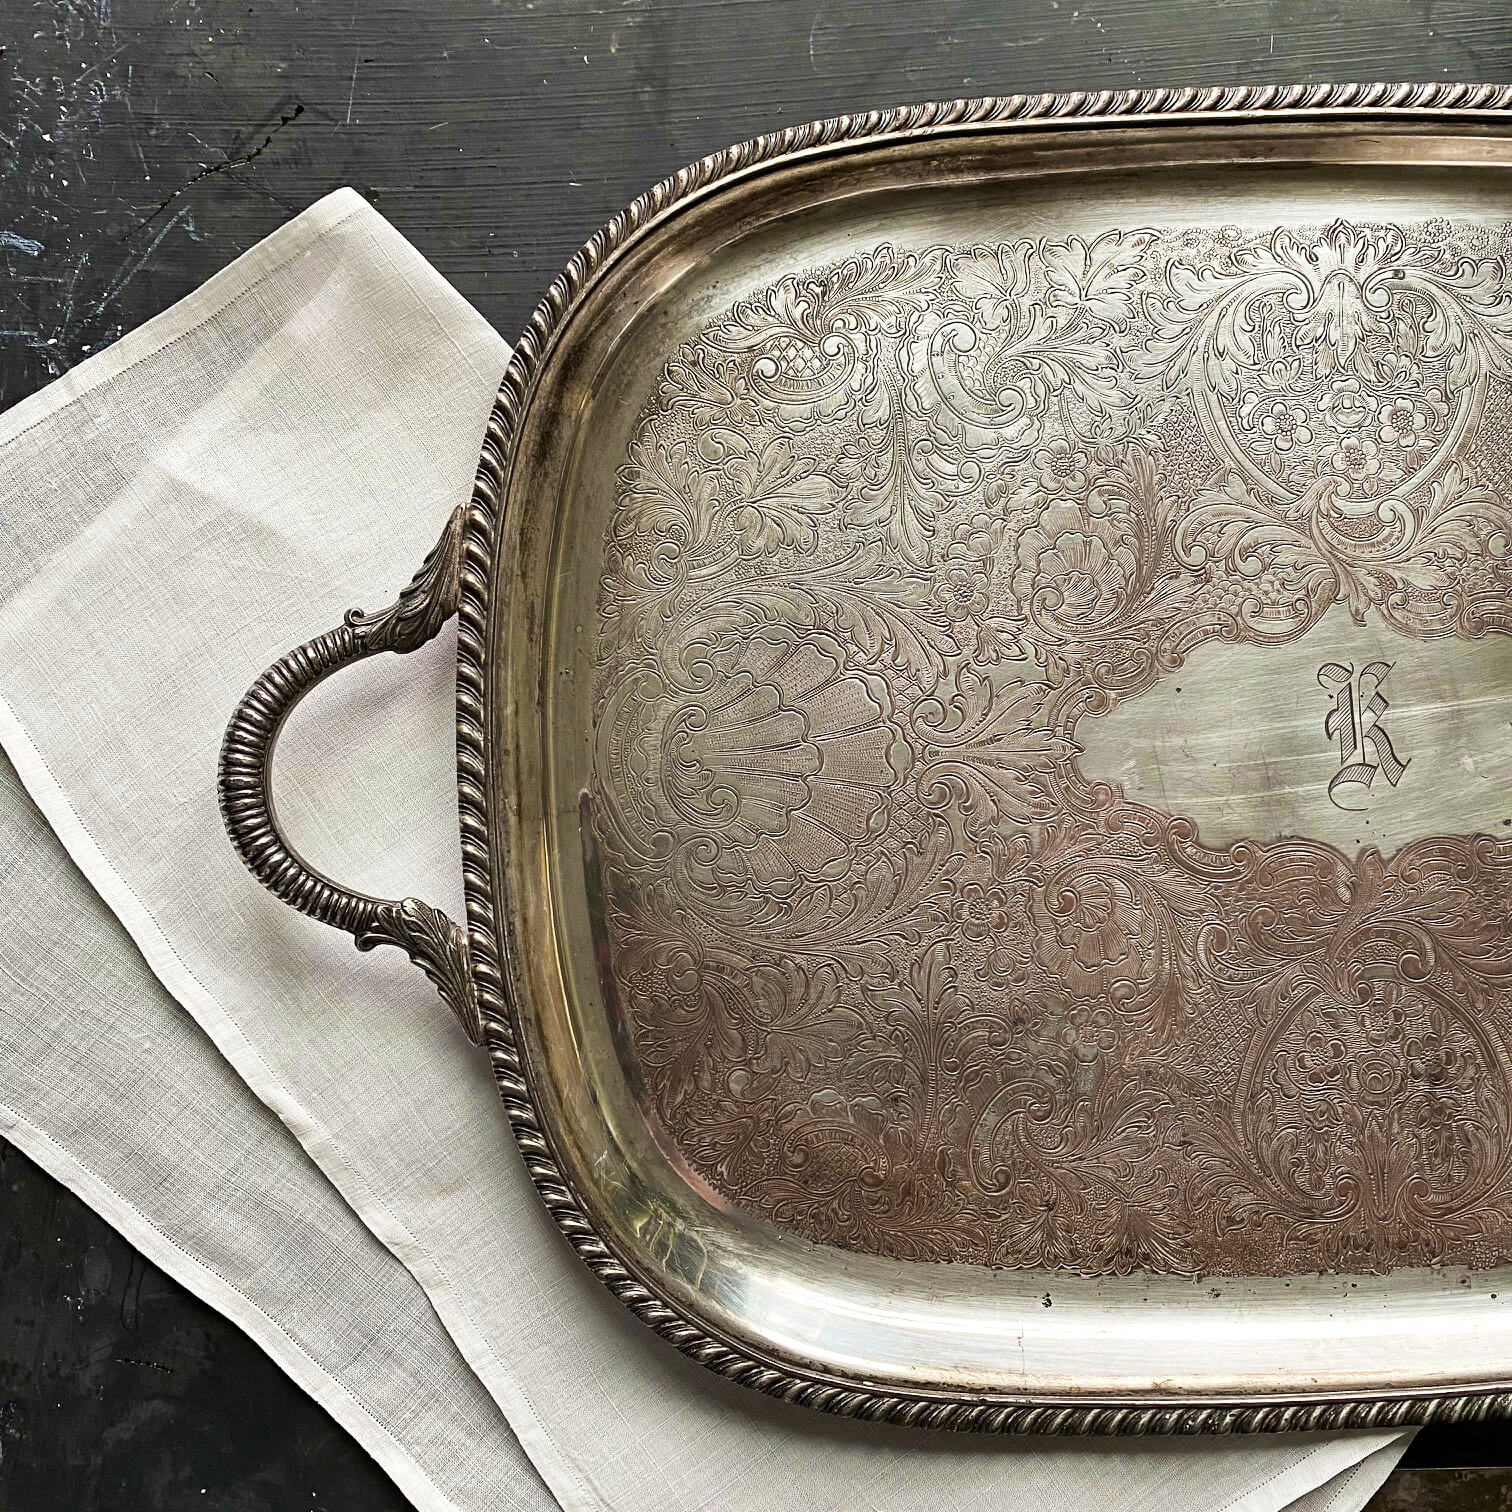 Vintage Silverplate Butler's Tray - Sheffield Silver Company - K Monogram - Electroplated Copper EPC